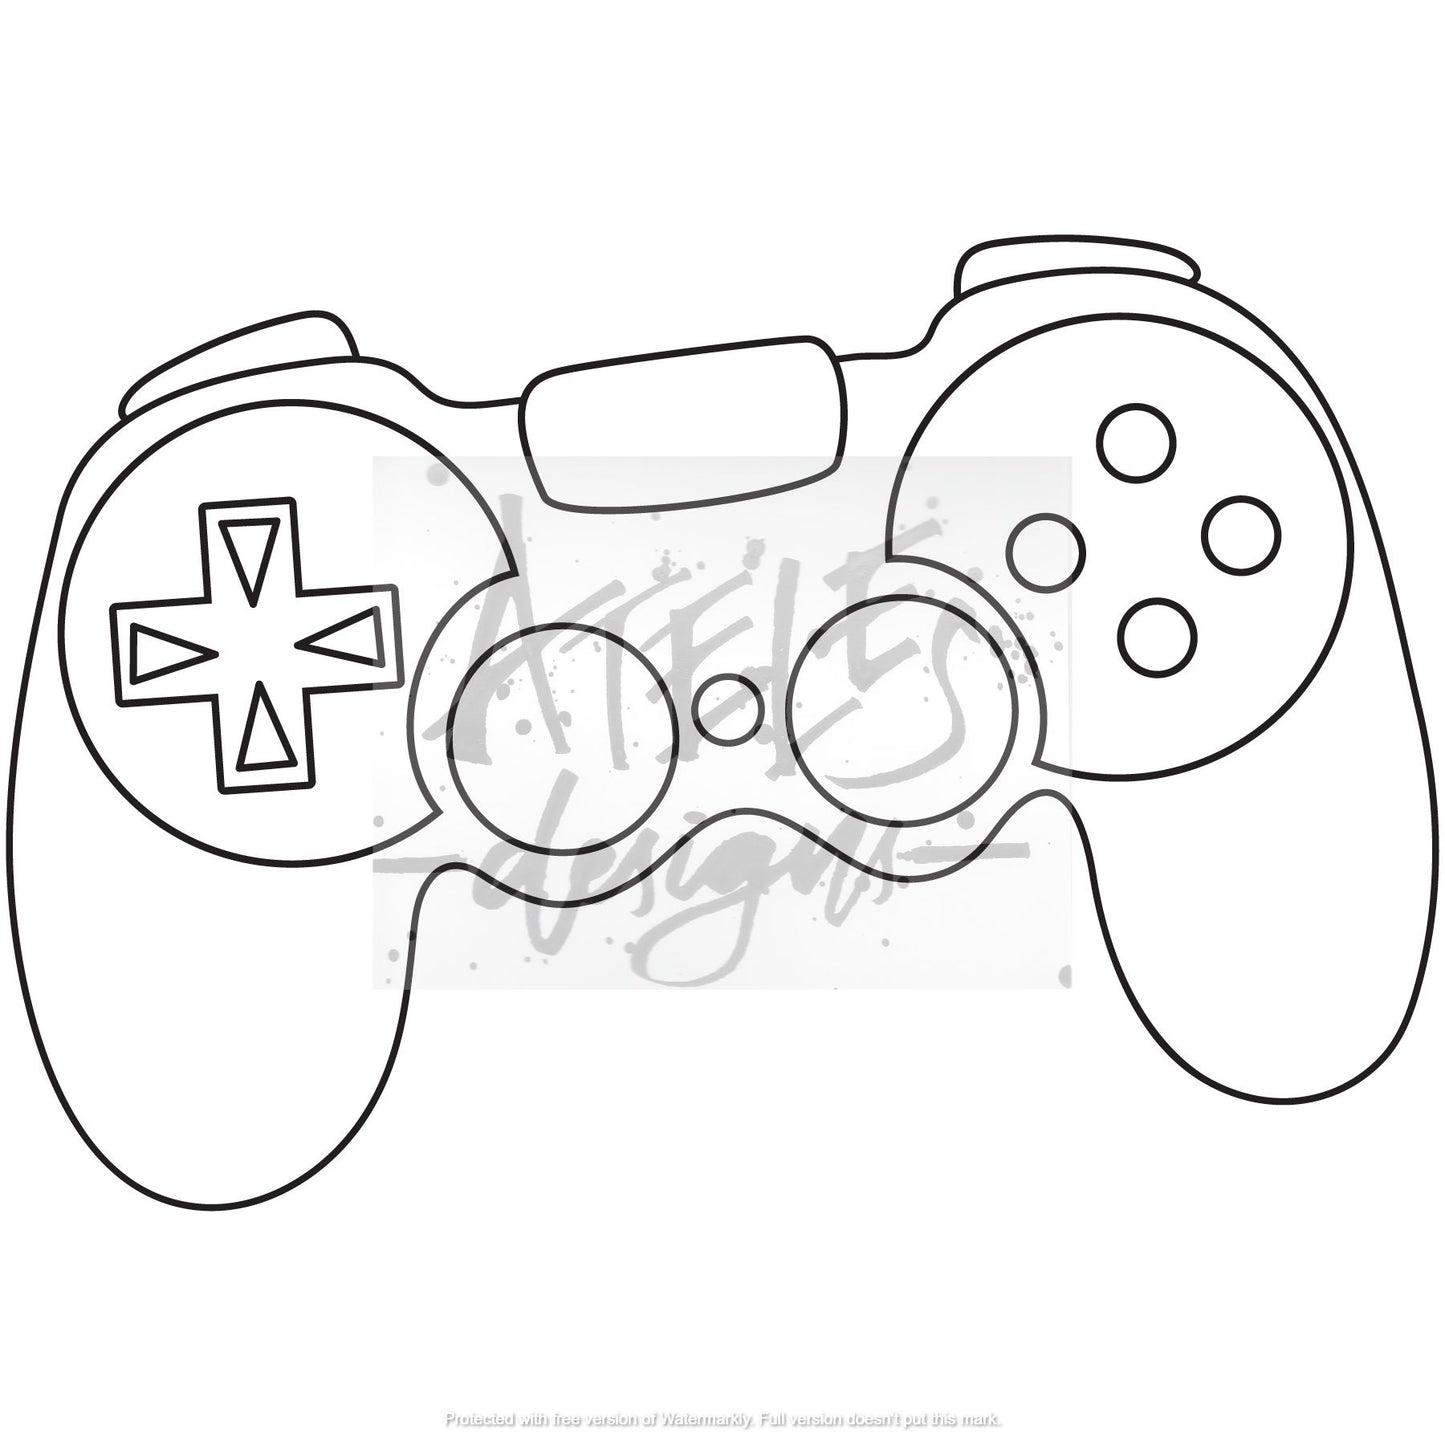 Gamer Engraving Add On Images